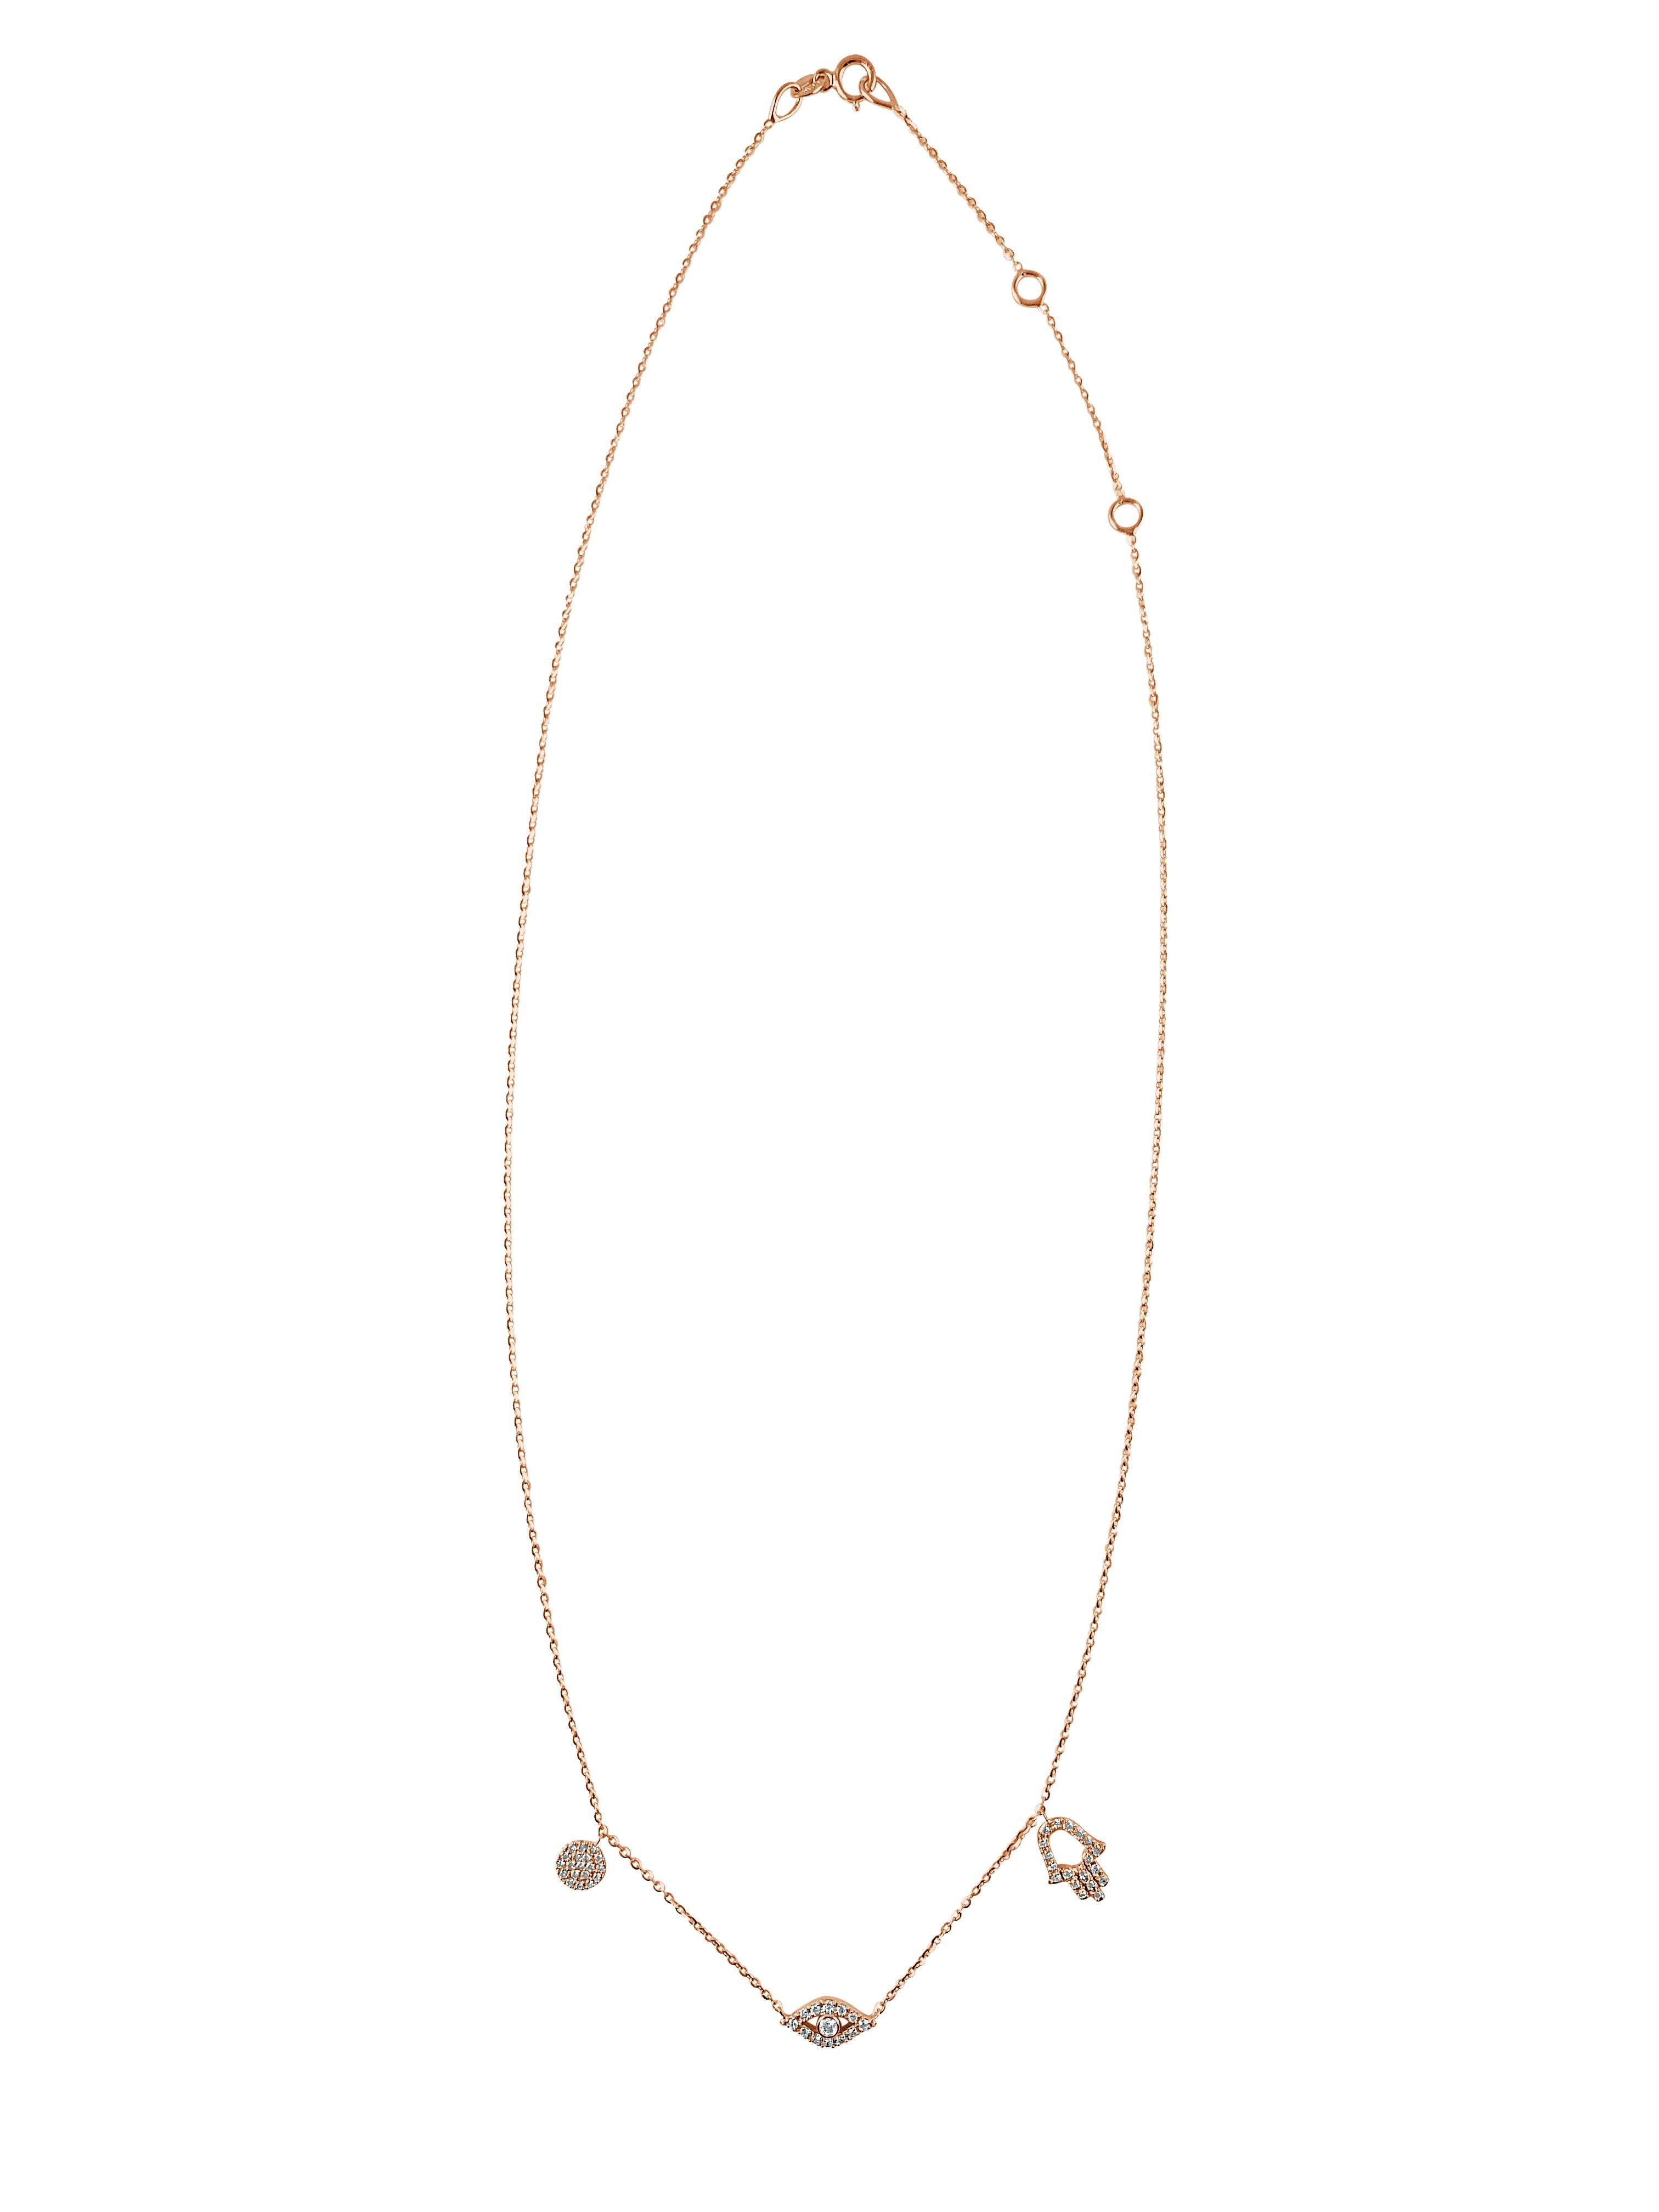 This stylish necklace for her showcases sparkling white natural diamonds that trace an eye, Hamsa and round circle disc charm. Crafted of 14k gold, the pendant has a total diamond weight of approximately 0.23 carat, and suspends from an adjustable